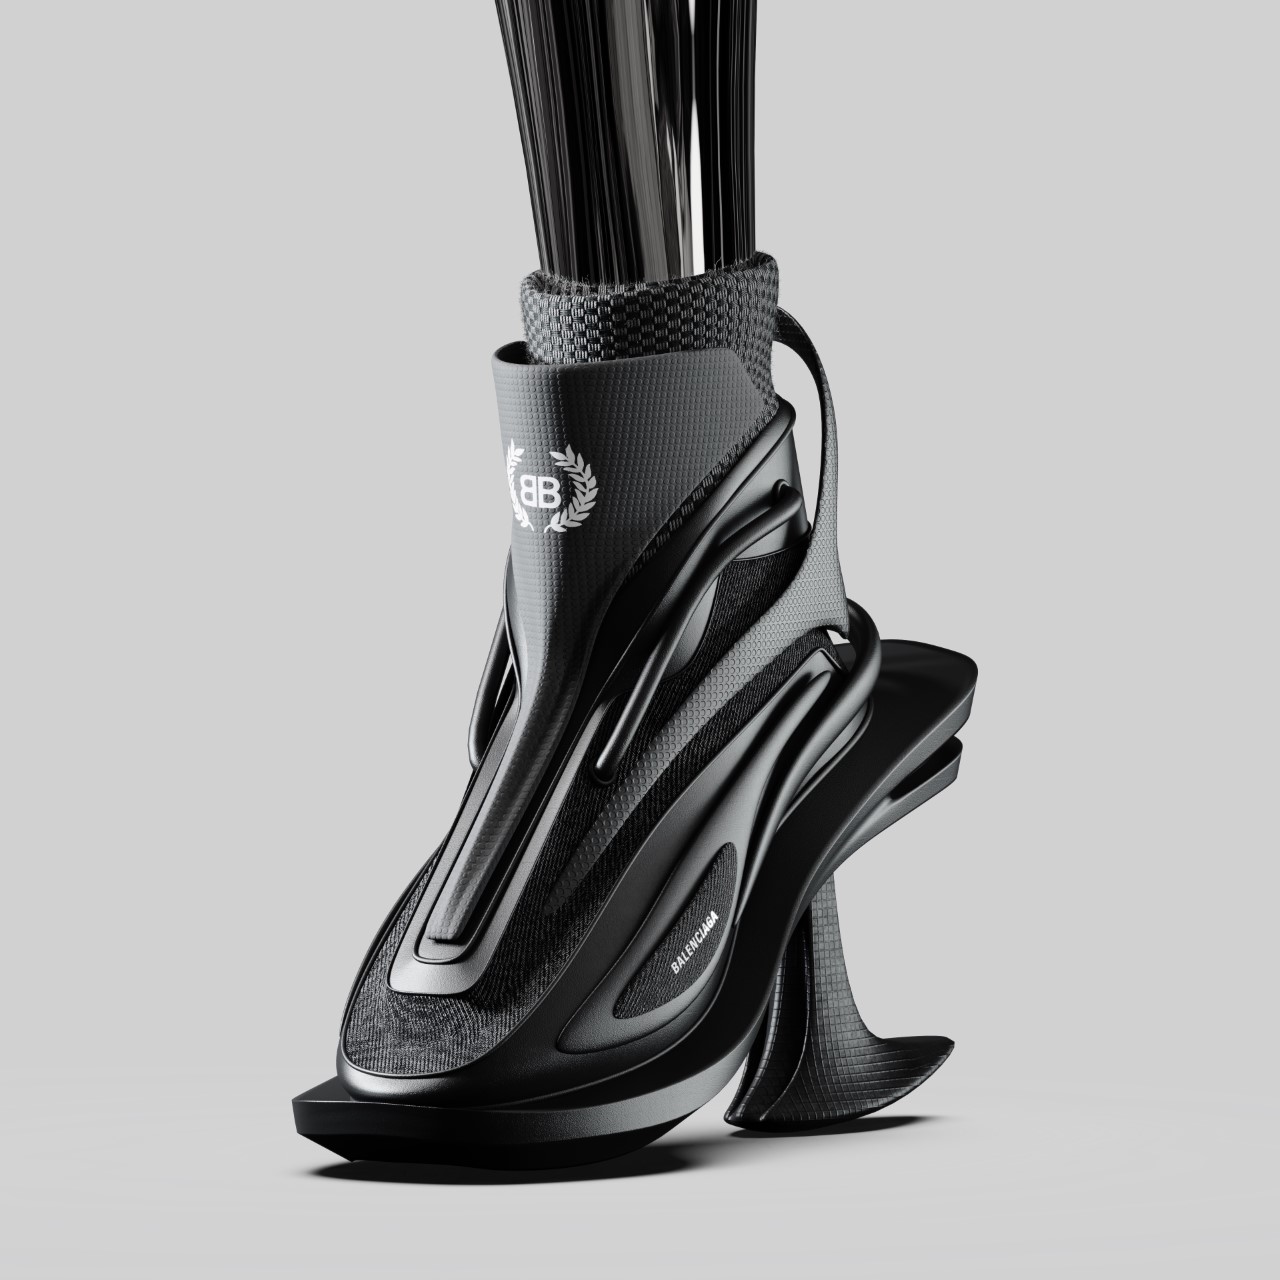 Balenciaga high-heel sneakers with fluid 3D-printed design shows what ...